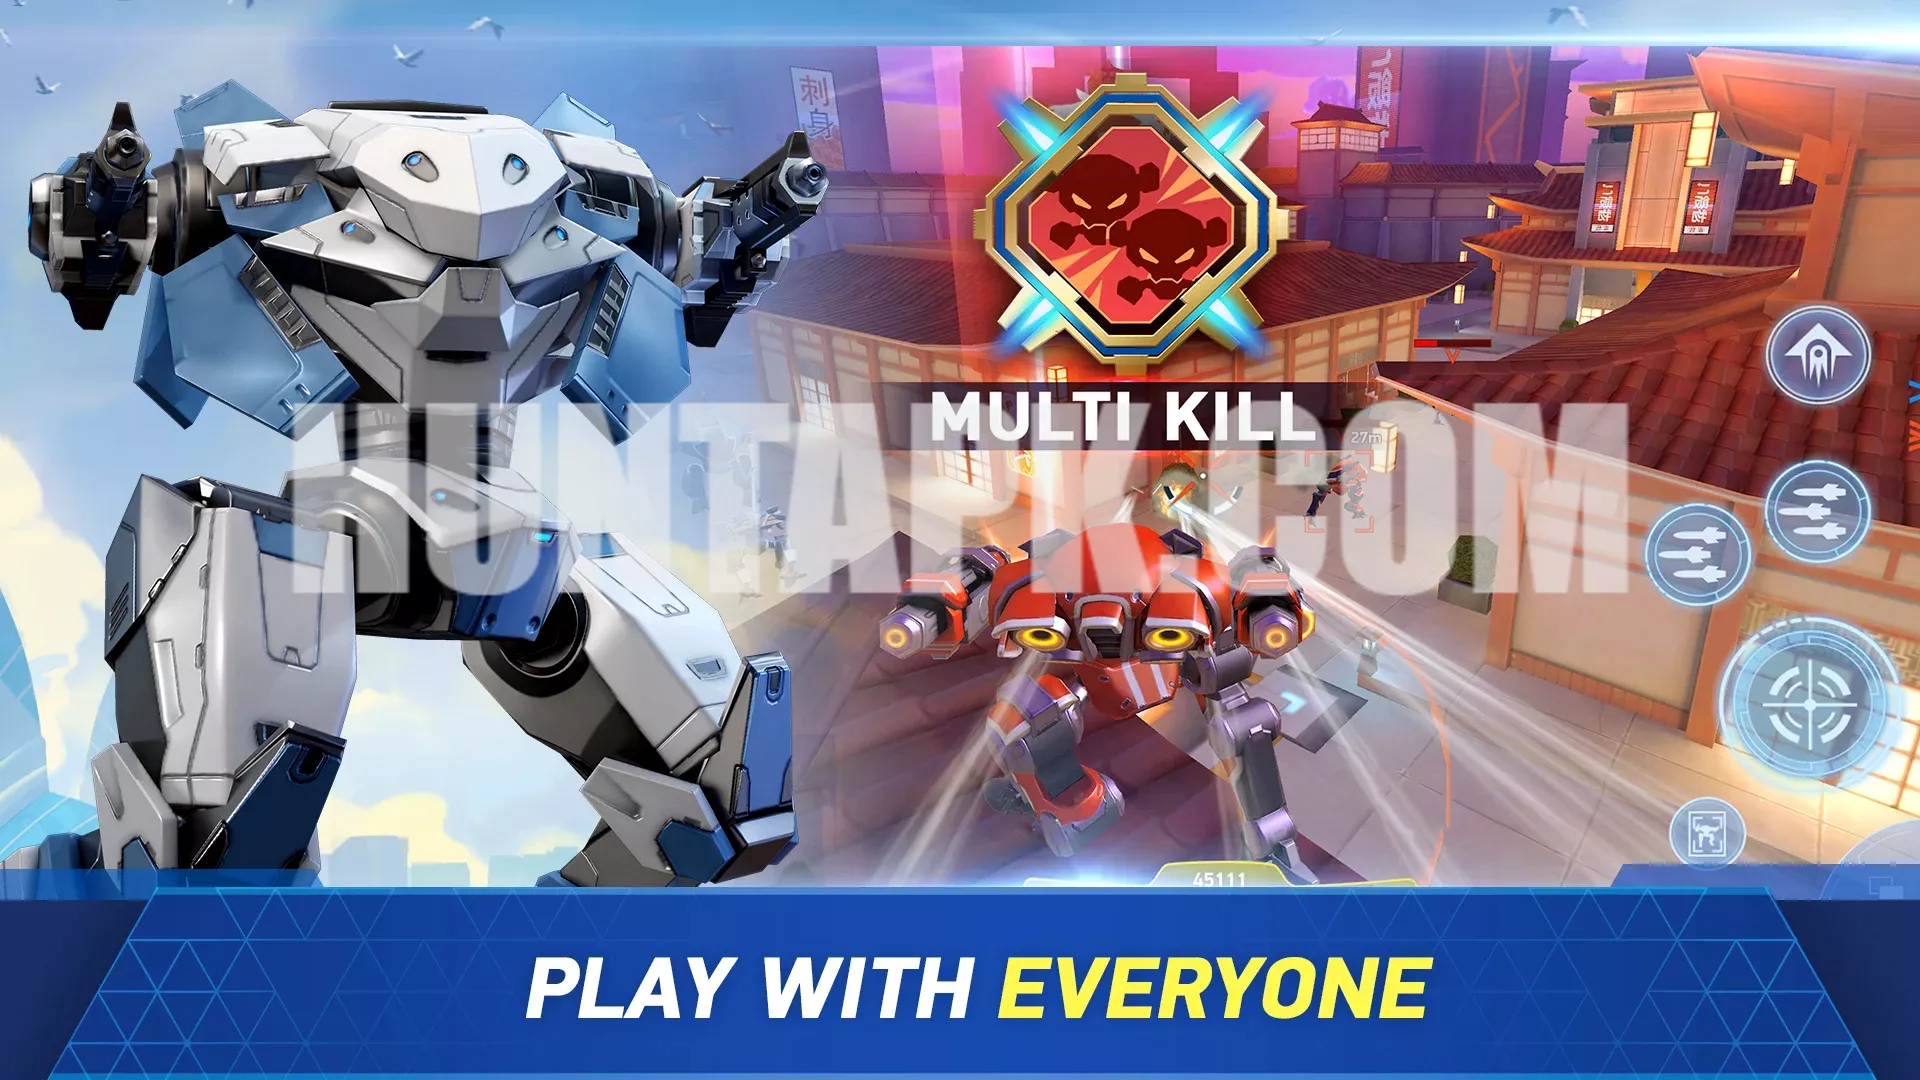 mech arena mod apk unlimited money and gems download latest version